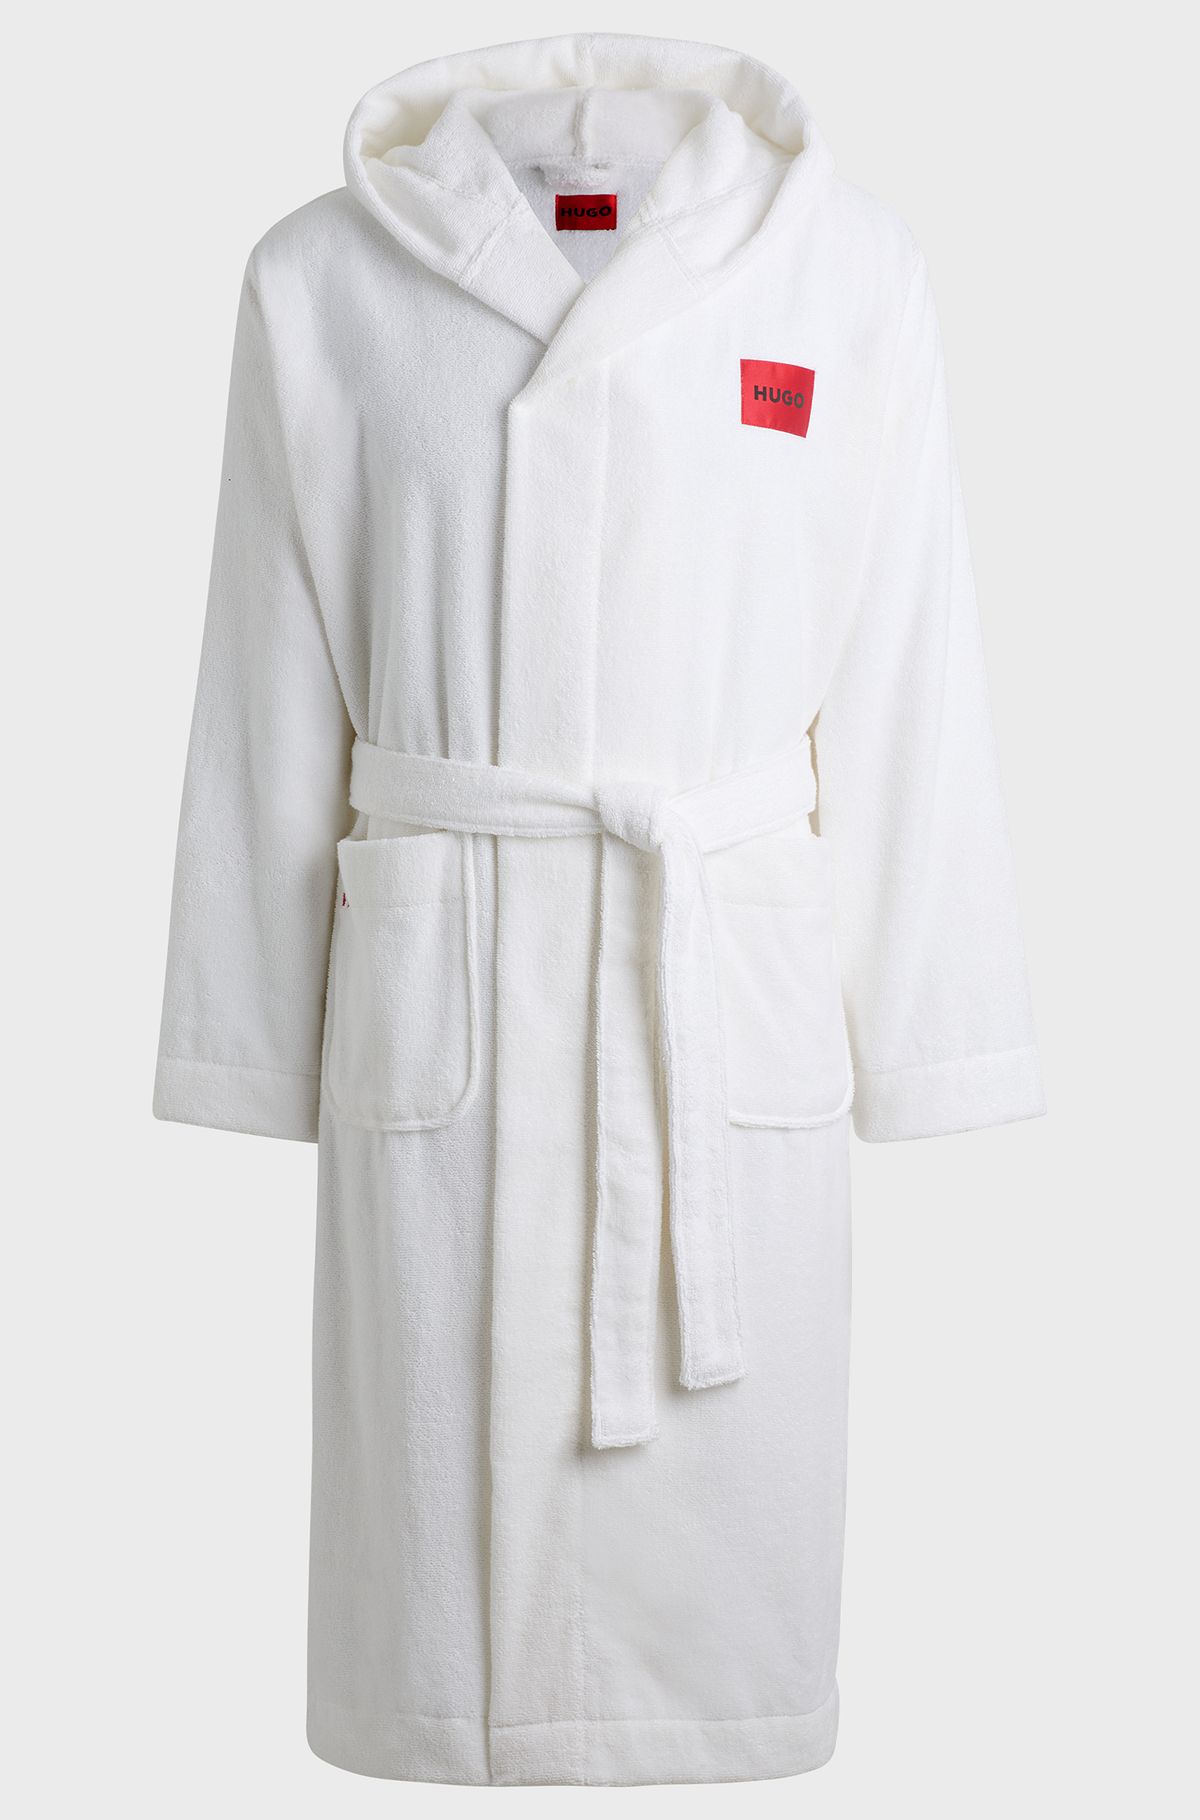 Cotton-terry dressing gown with red logo label, White